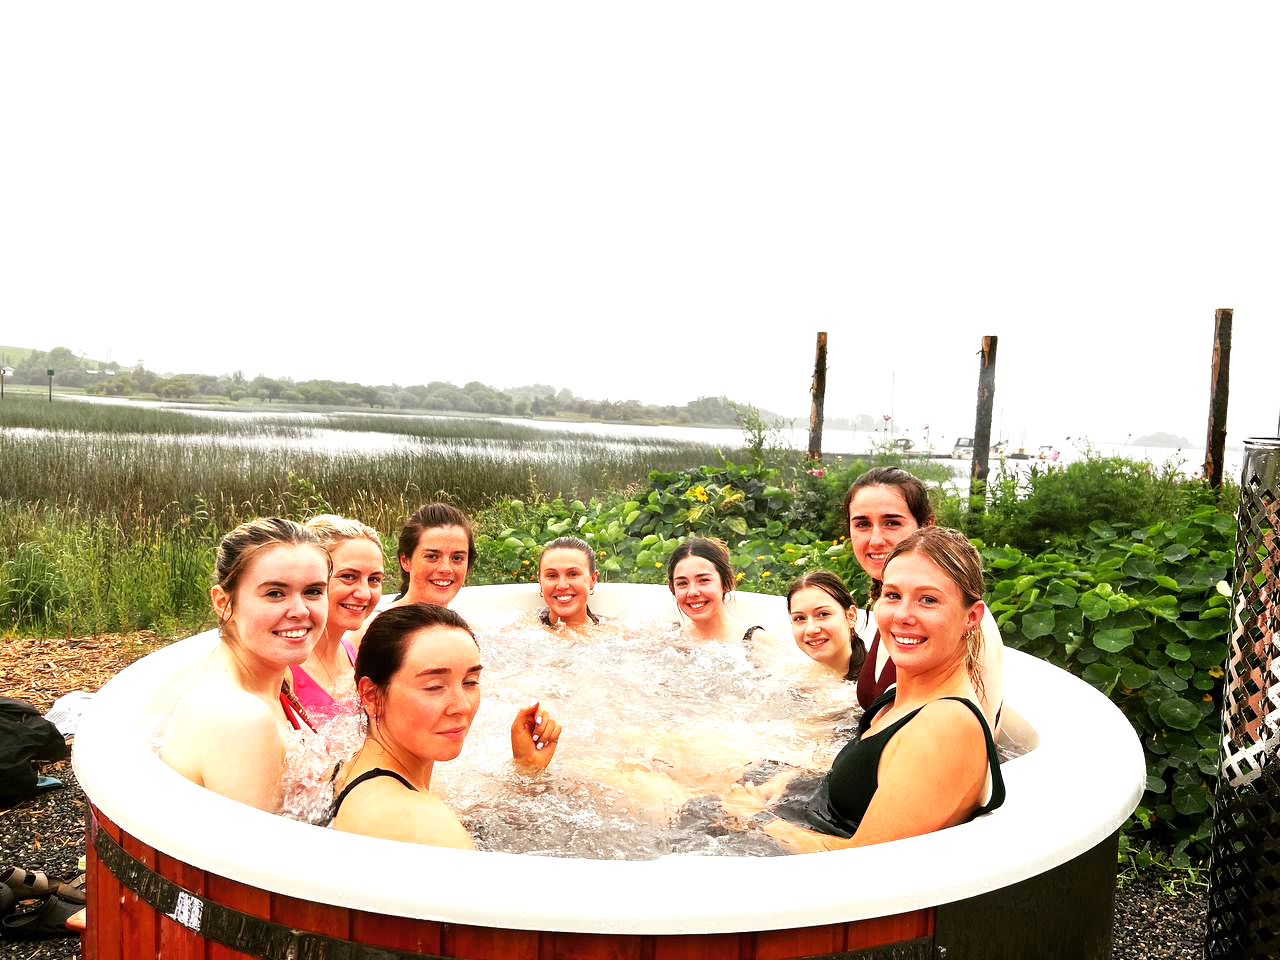 Hen party Carrick On Shannon<br />
Hen party Drumshanbo<br />
Hen party Leitrim